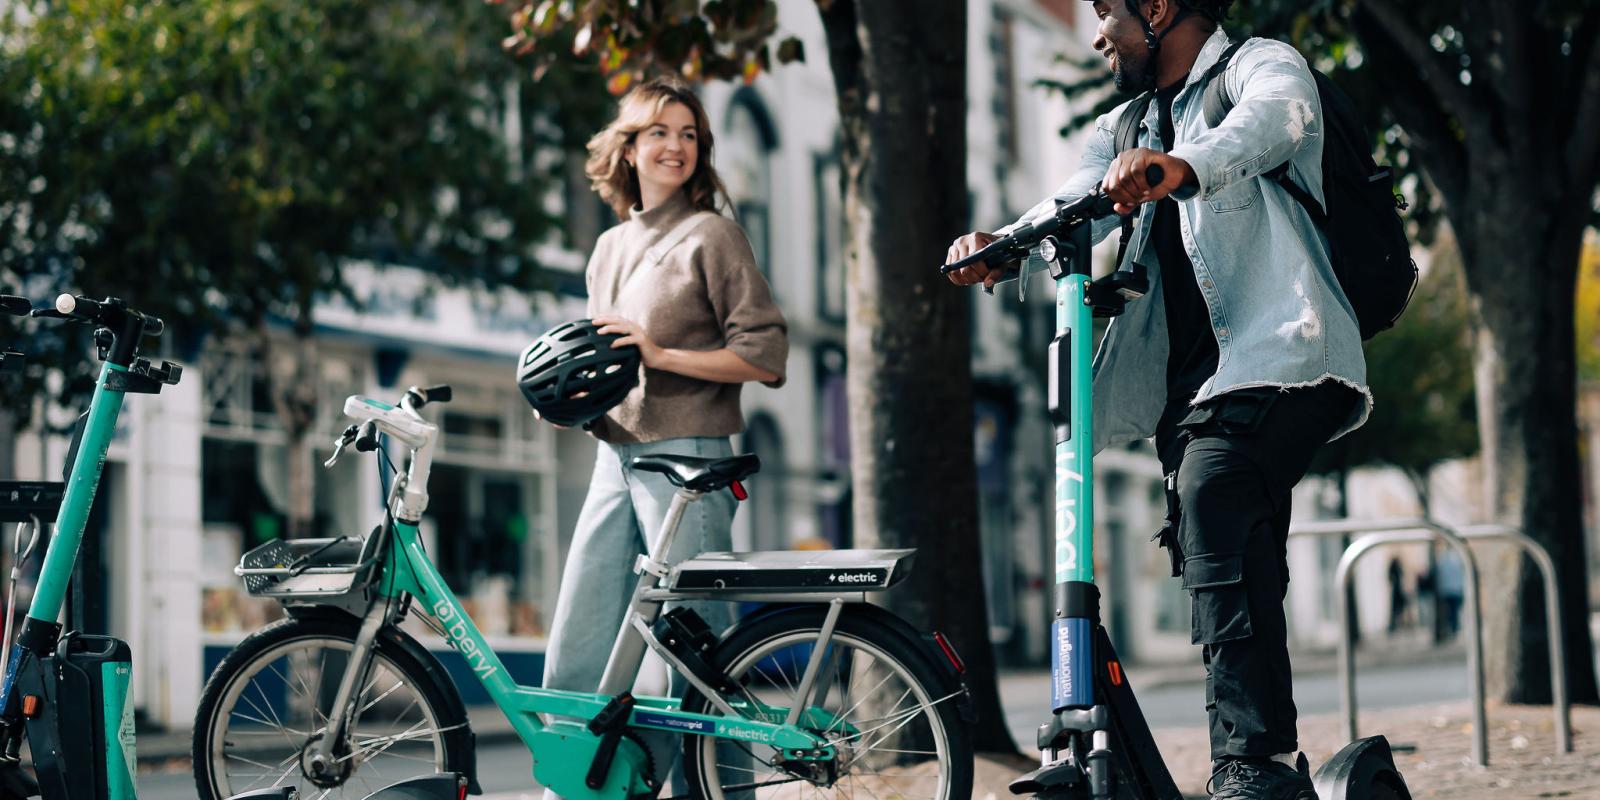 A woman is holding a helmet and stood next to a Beryl hire bike, she is smiling and looking at a man who has one foot on a Beryl e-scooter